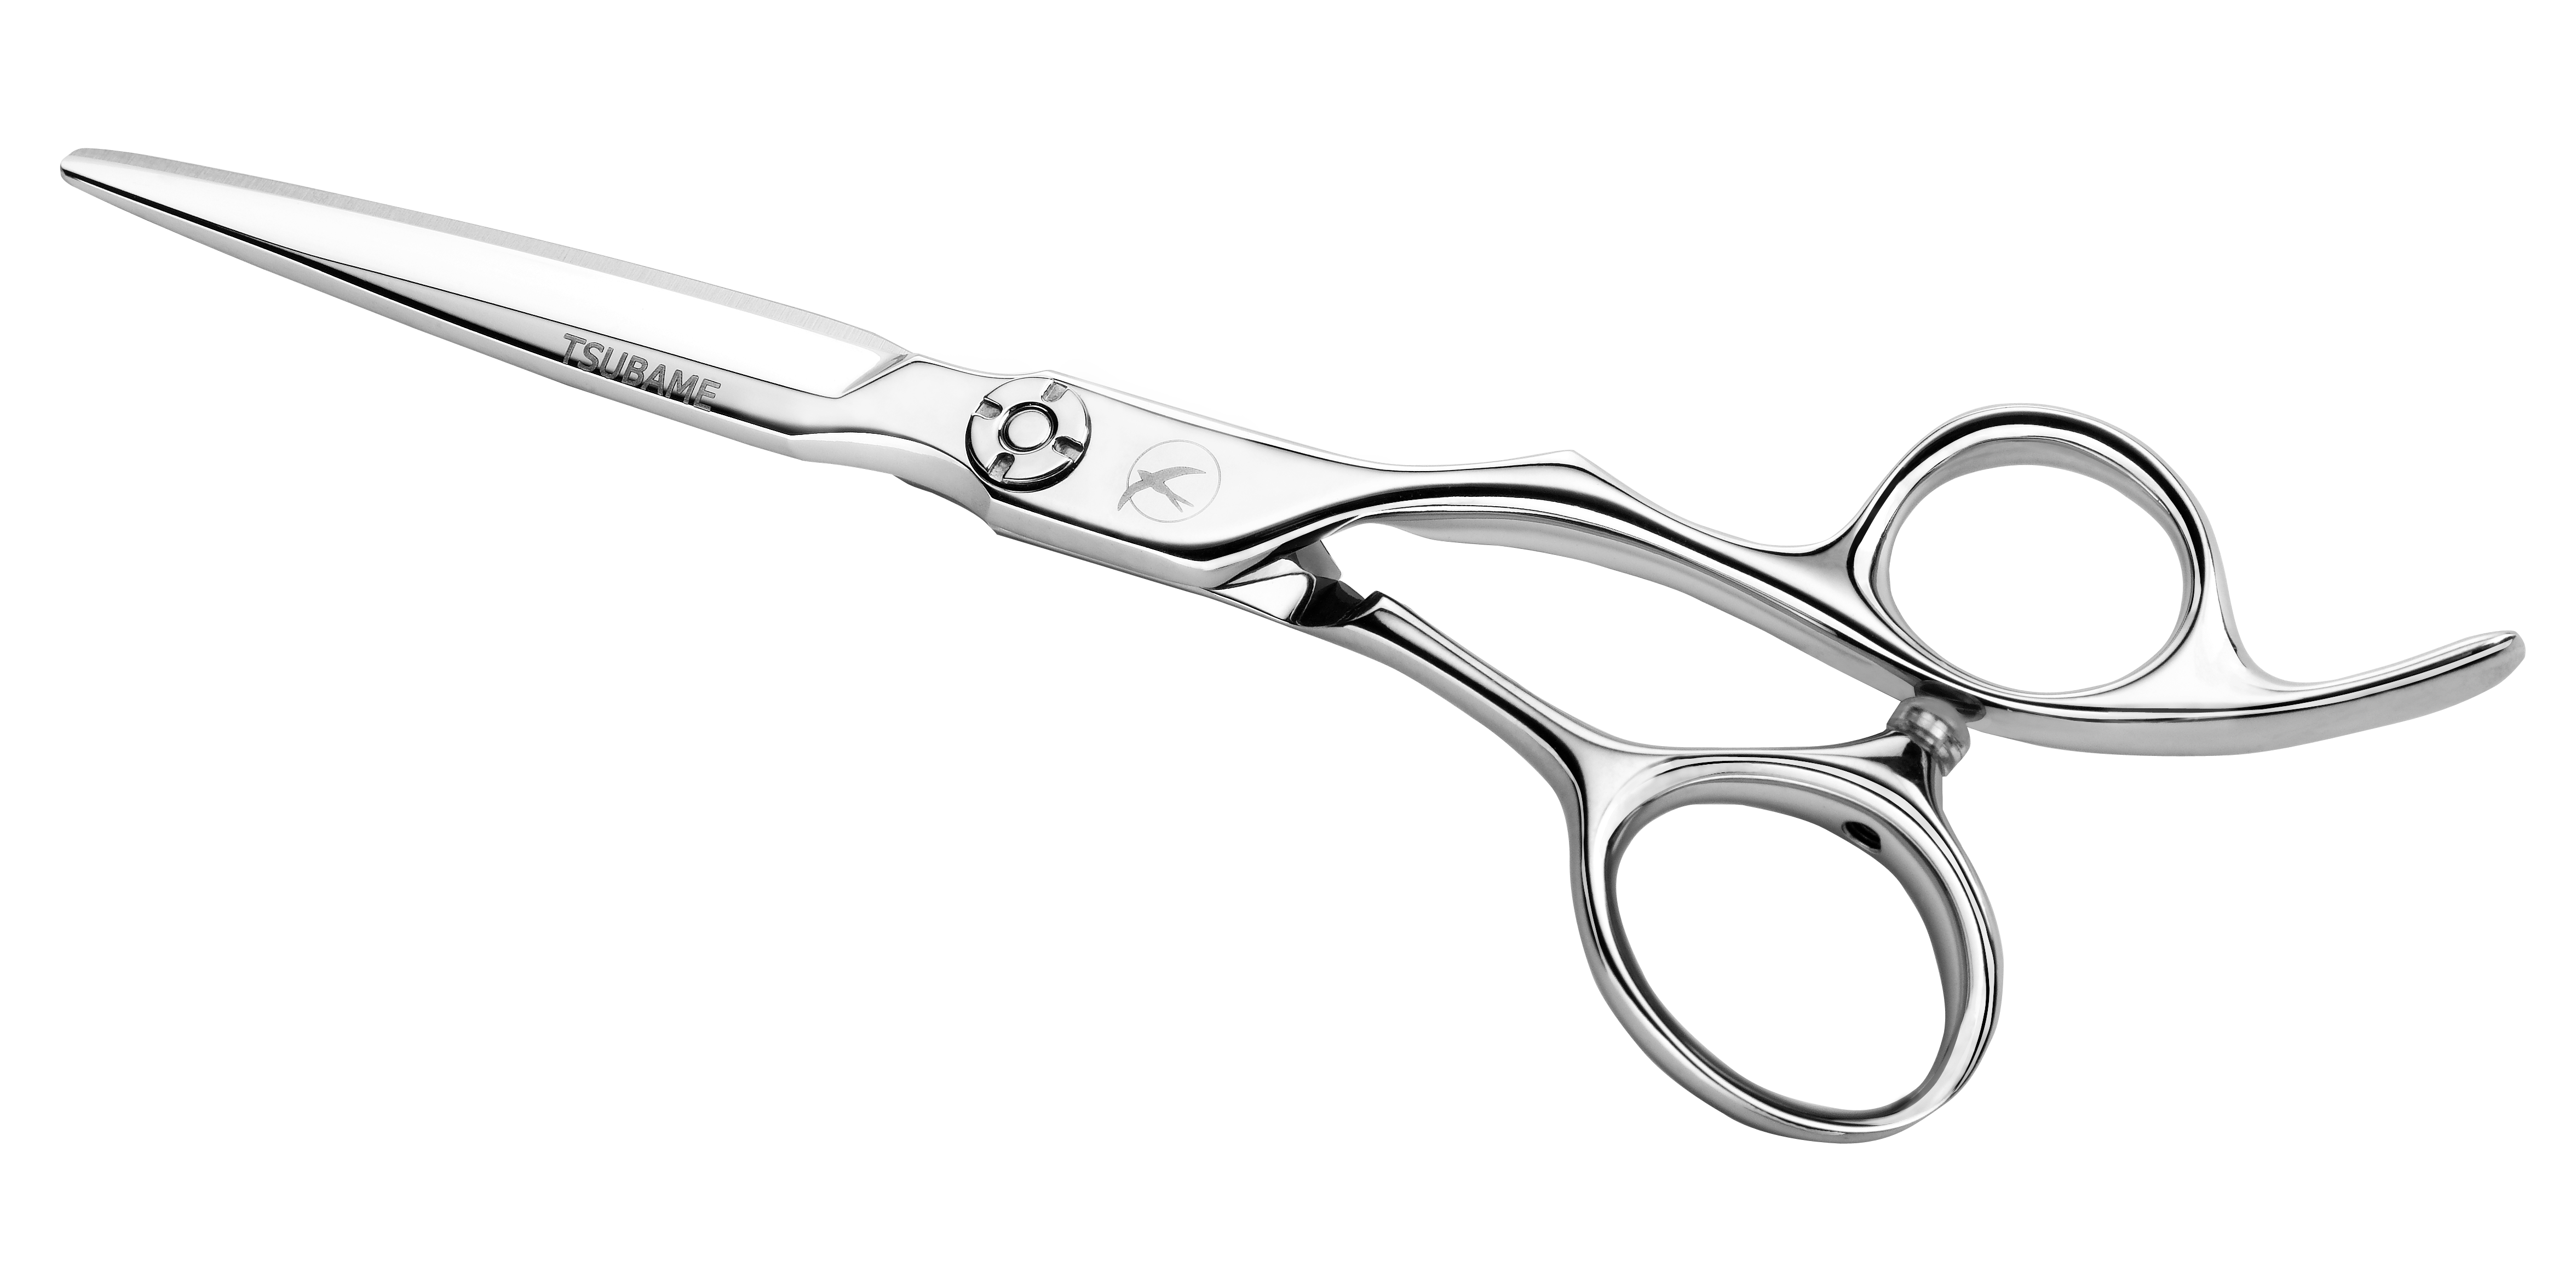 shears clipart hairstylist